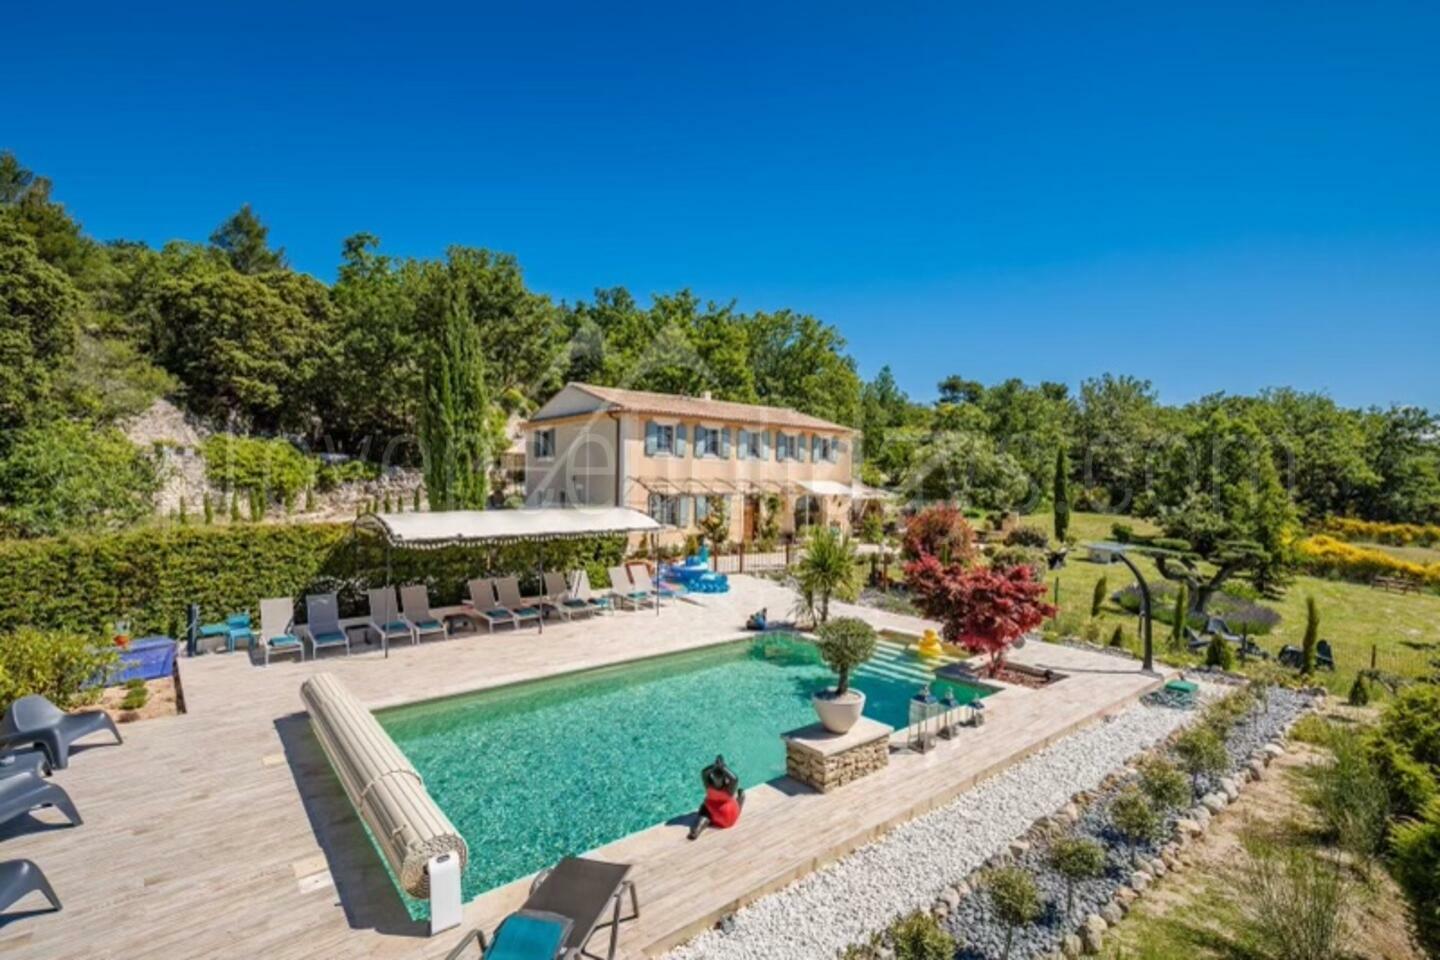 Recently restored bastide with heated swimming pool 1 - Recently restored bastide with heated swimming pool: Villa: Exterior